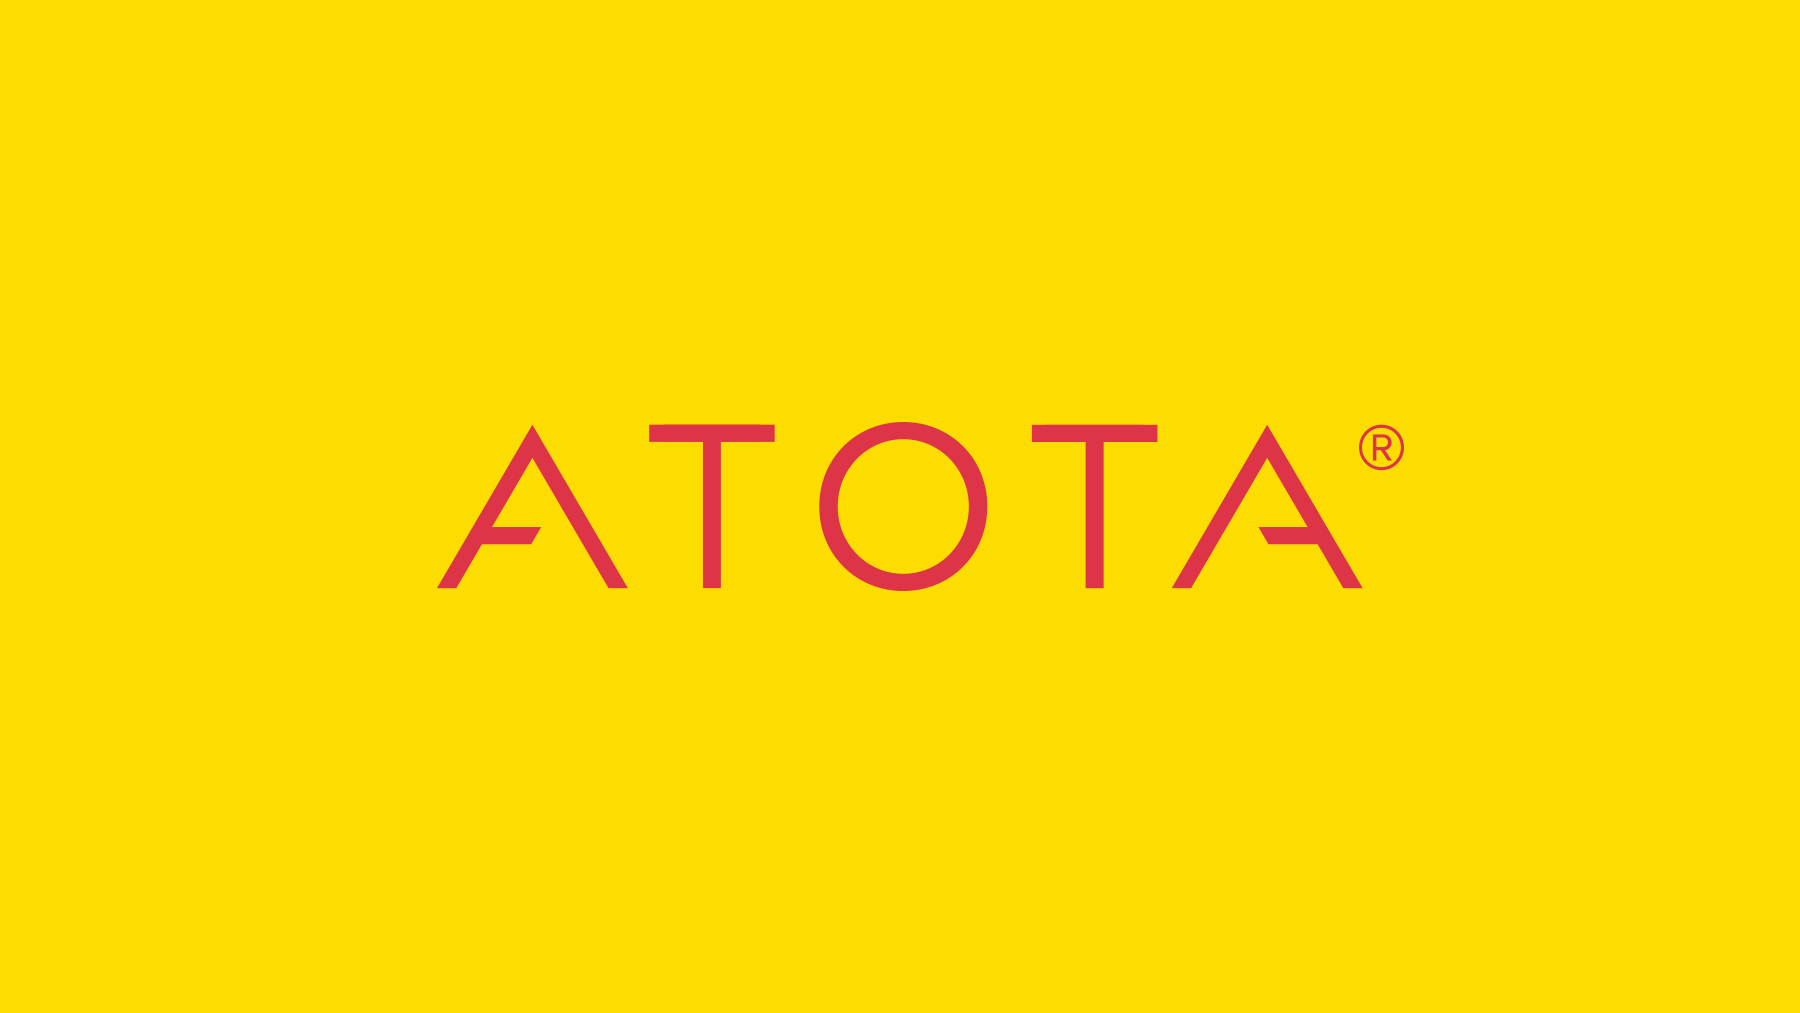 Type-only brand identity design for Atota Communications.